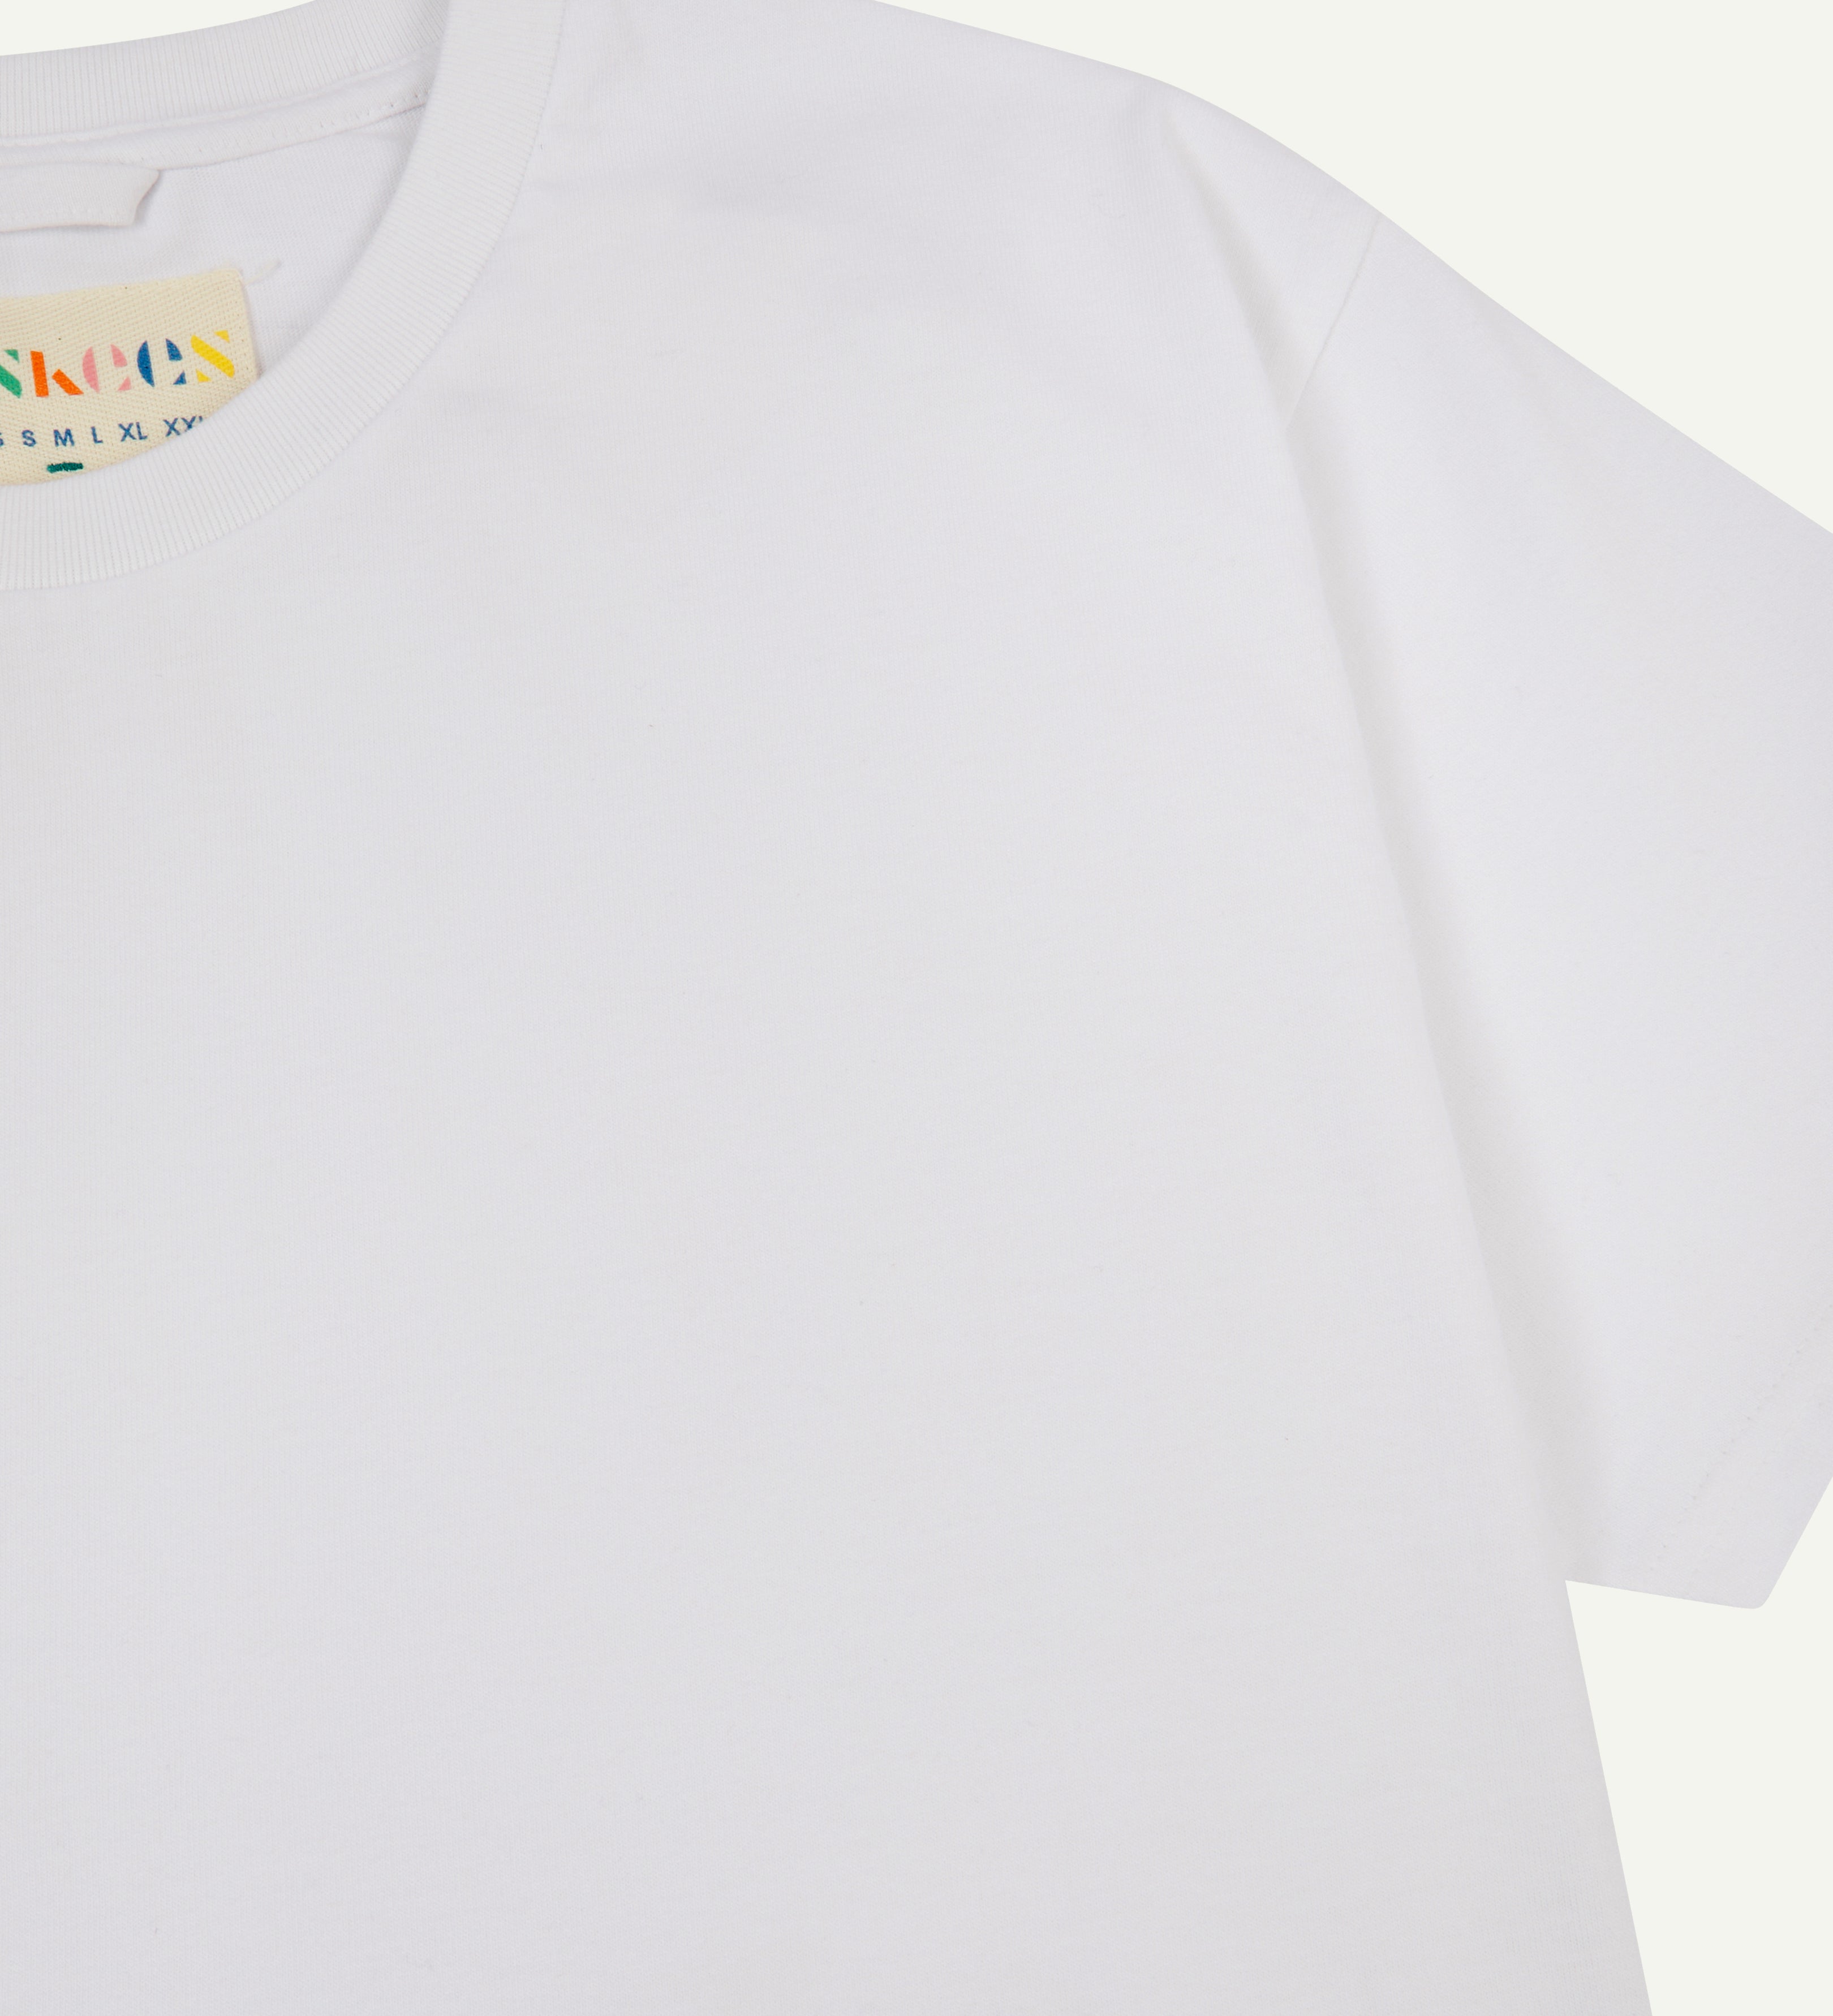 front view of uskees #7006 men's short sleeve T-shirt  in white showing part of uskees neck label.